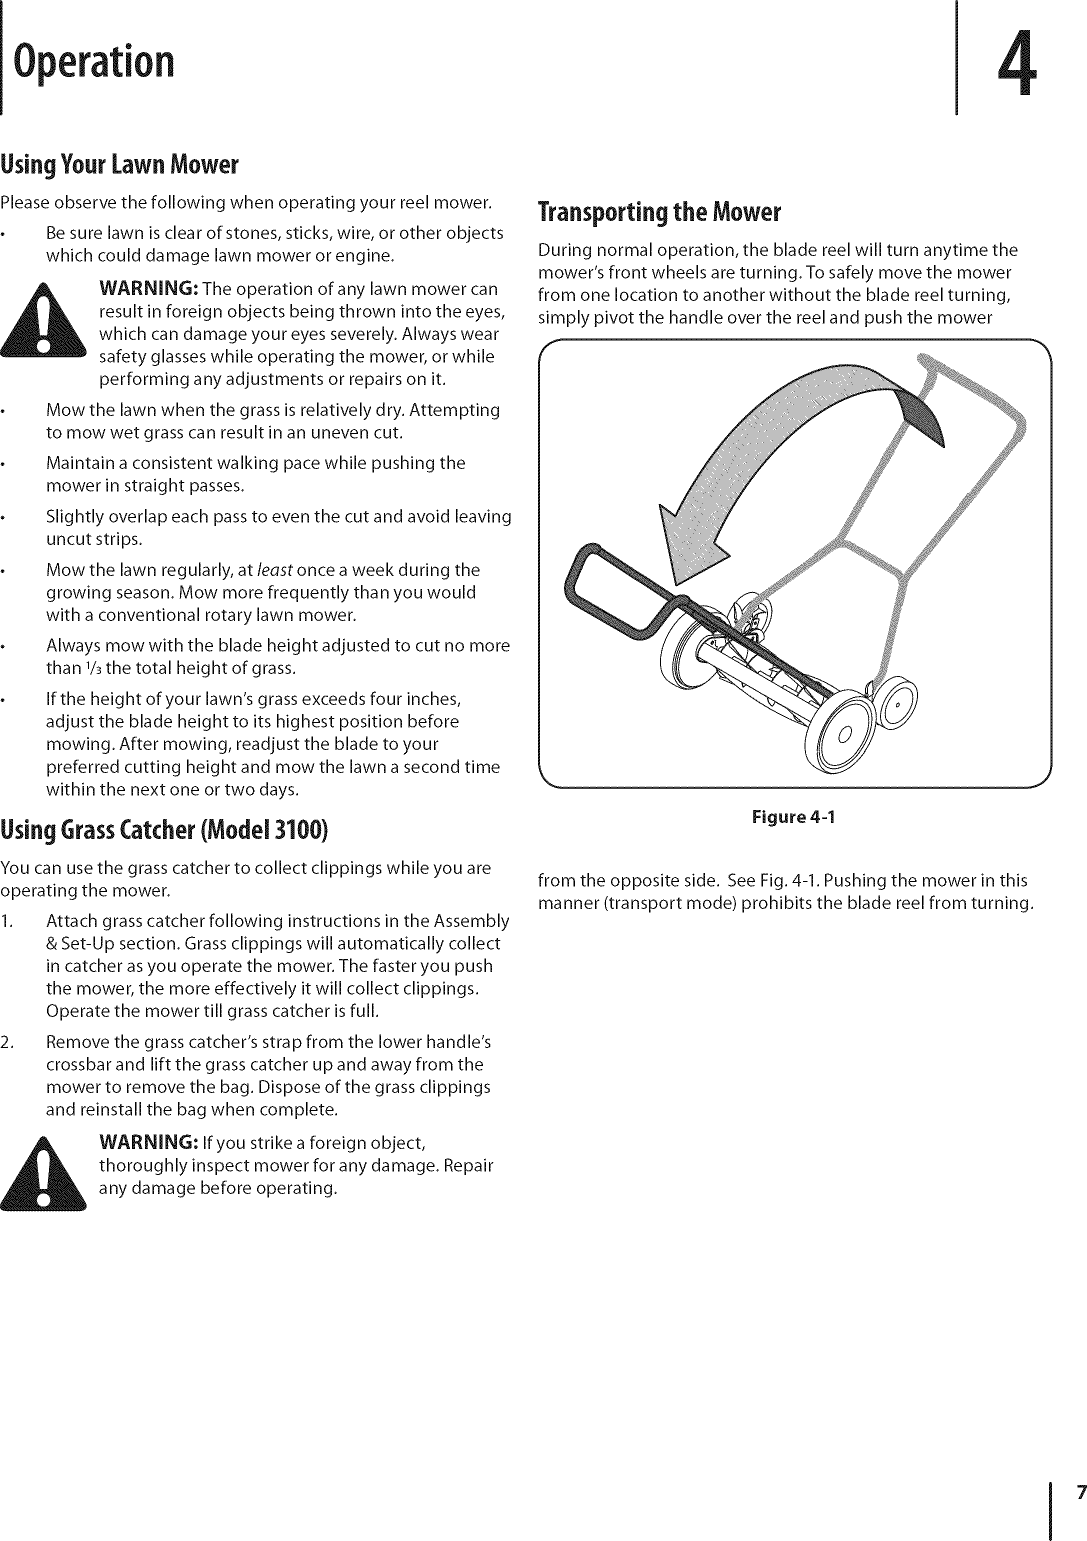 Page 7 of 12 - Kmart 02823117-3 User Manual  REEL MOWER - Manuals And Guides 1012090L